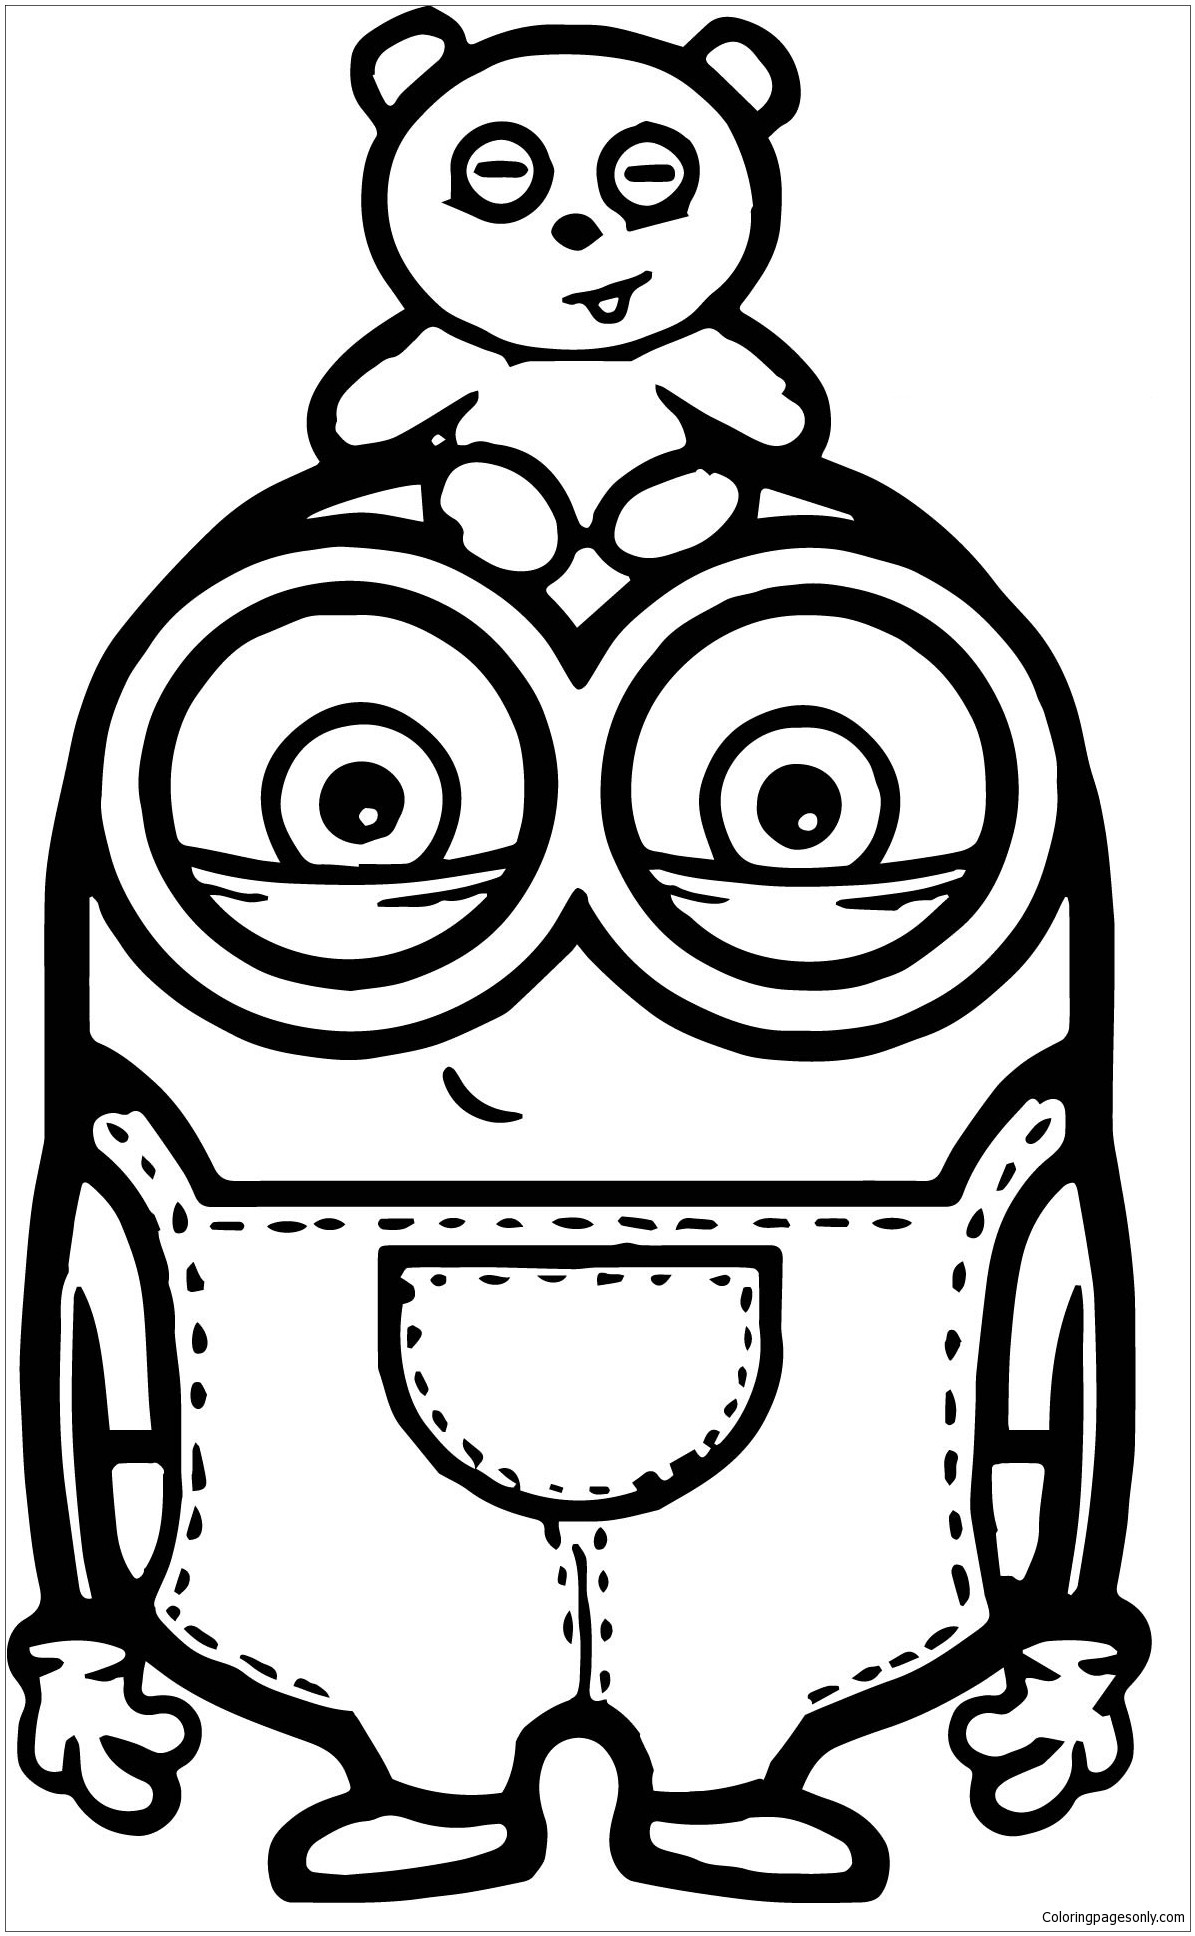 Download Minion Bob Coloring Pages - Coloring Home